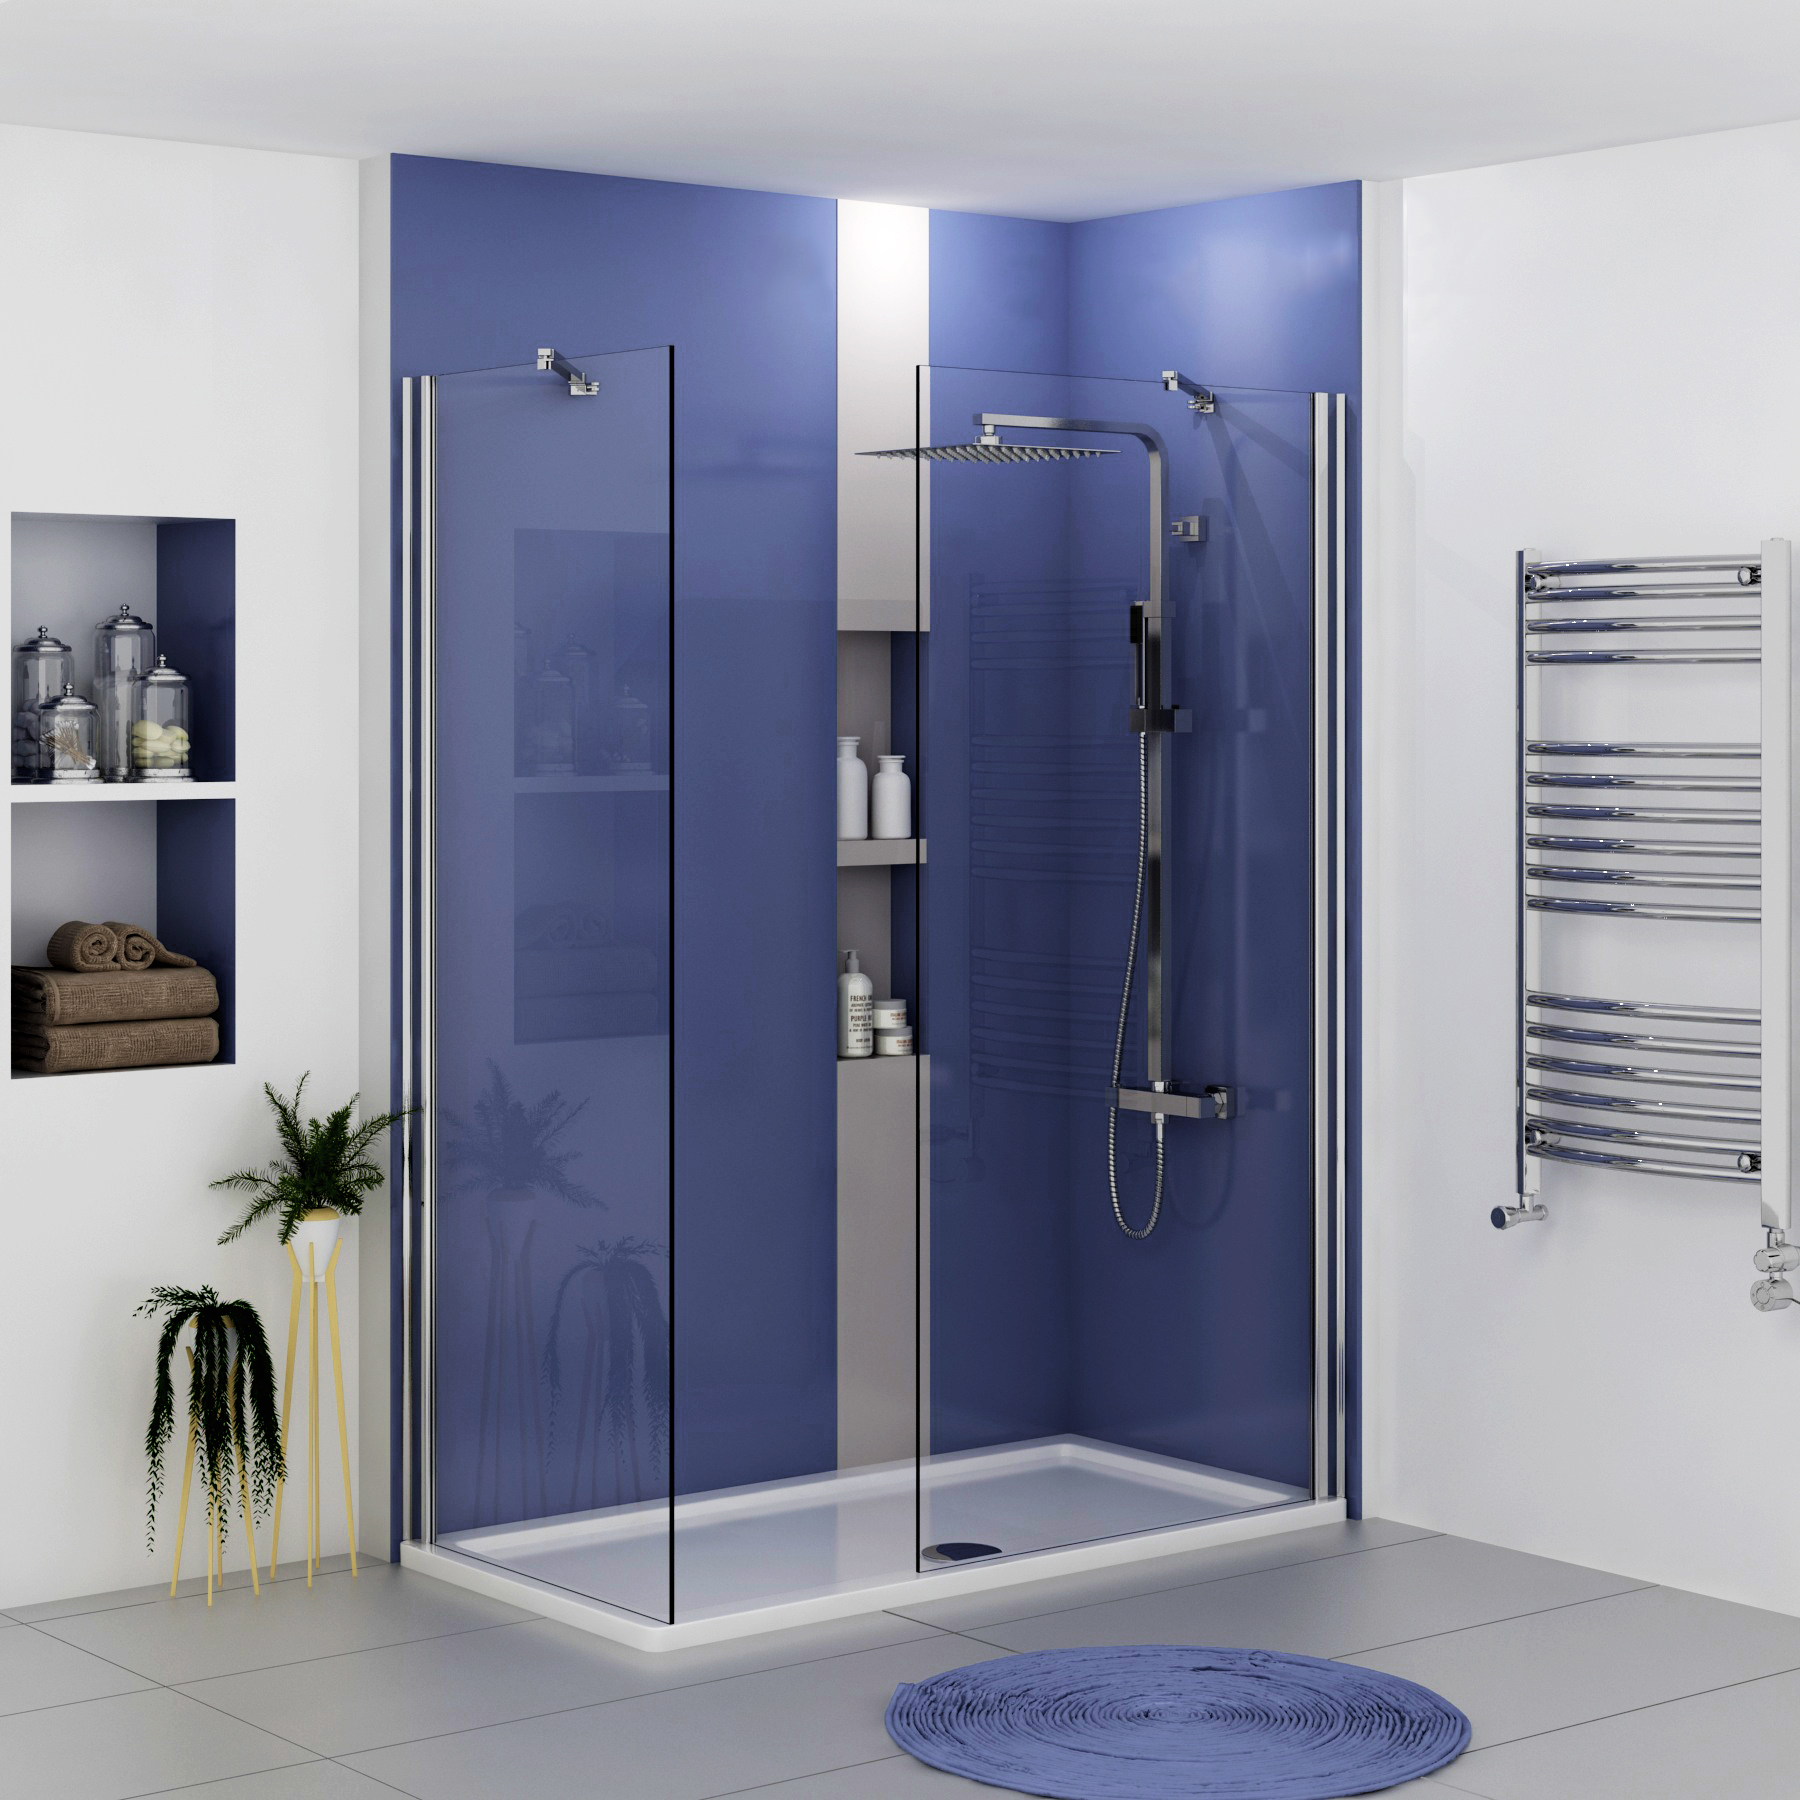 Marbella 8mm Walk In Shower Enclosure with Shower Tray 1400 x 700mm - Easy Clean Wet Room